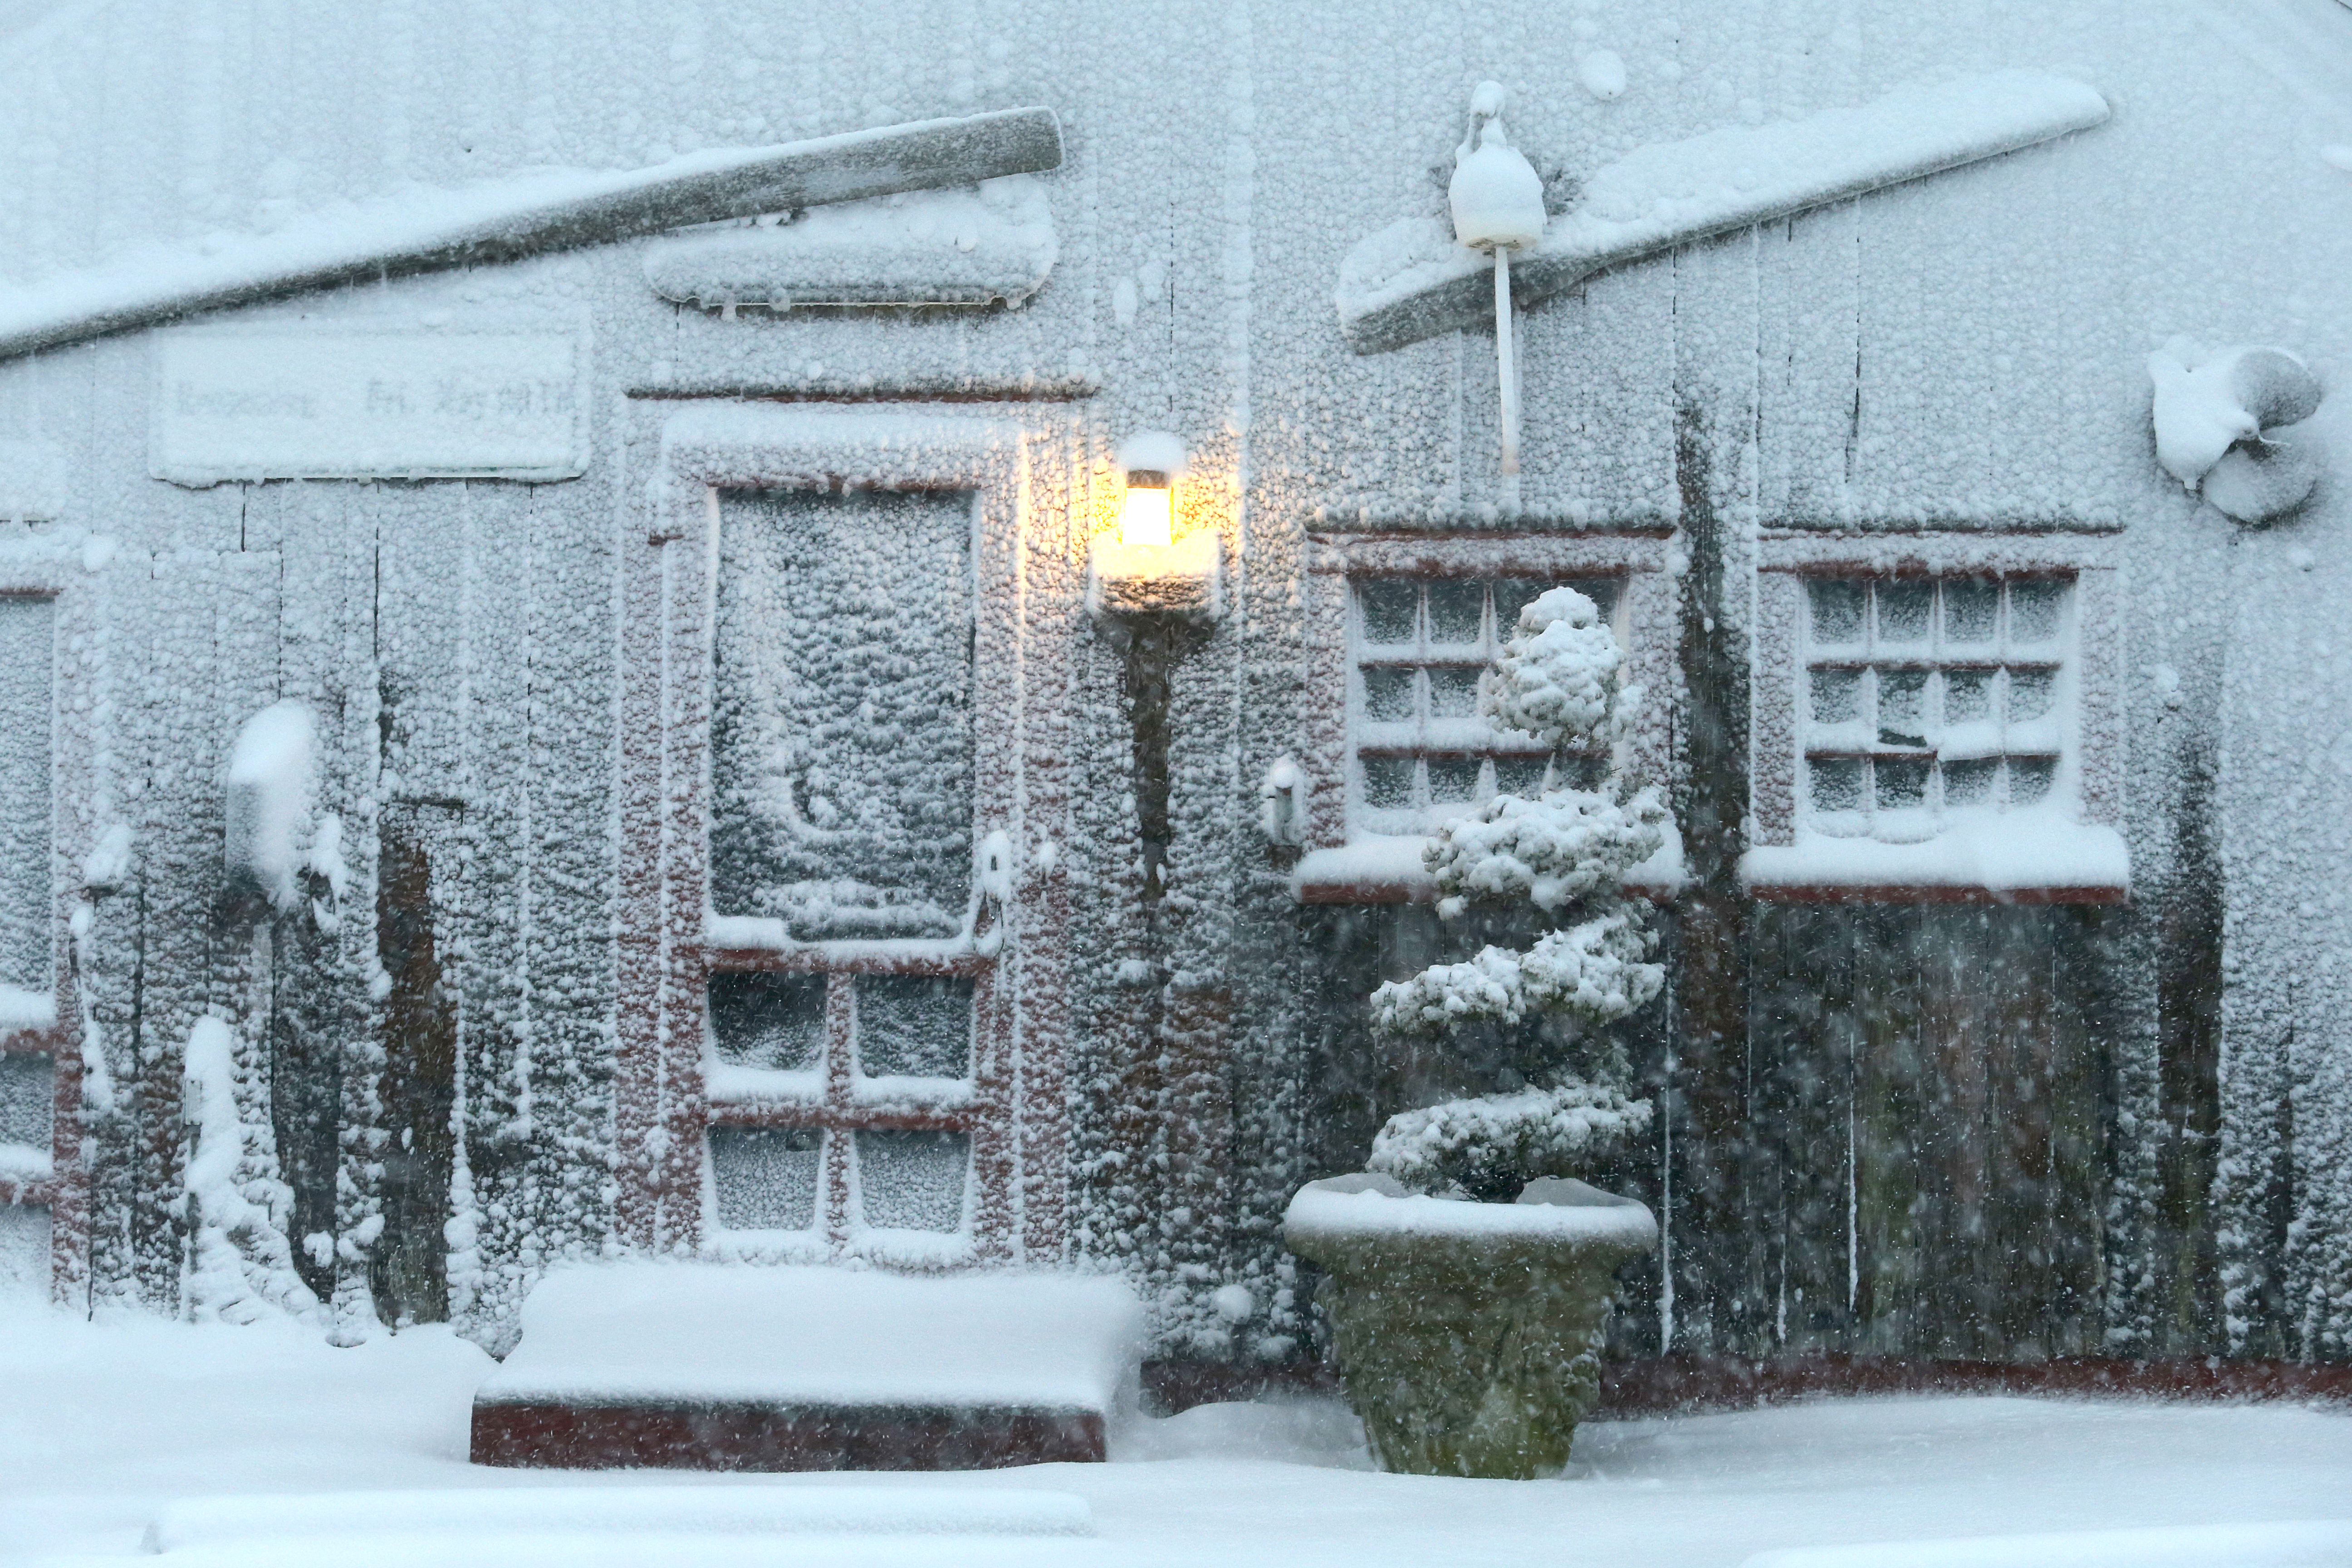 Entrance to Jim's Clam Shack during the snowstorm in Falmouth, MA on Jan. 29, 2022.